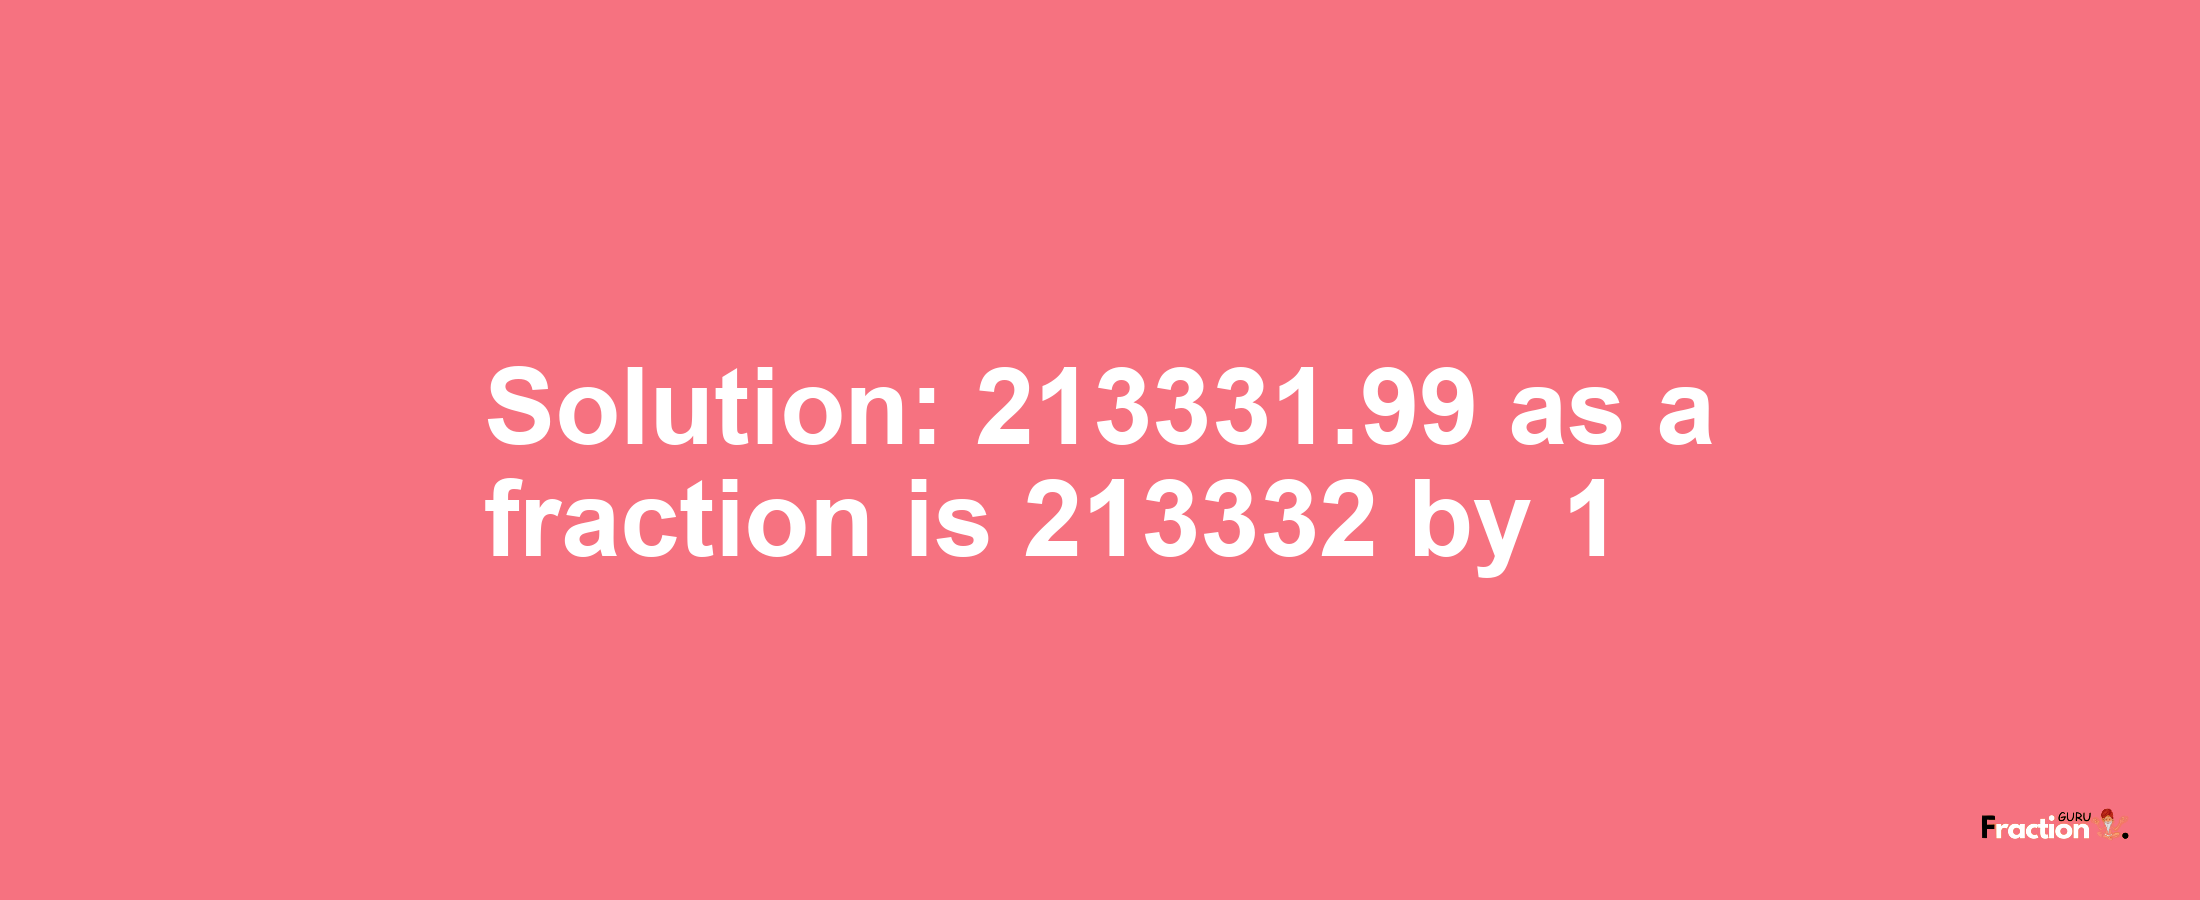 Solution:213331.99 as a fraction is 213332/1